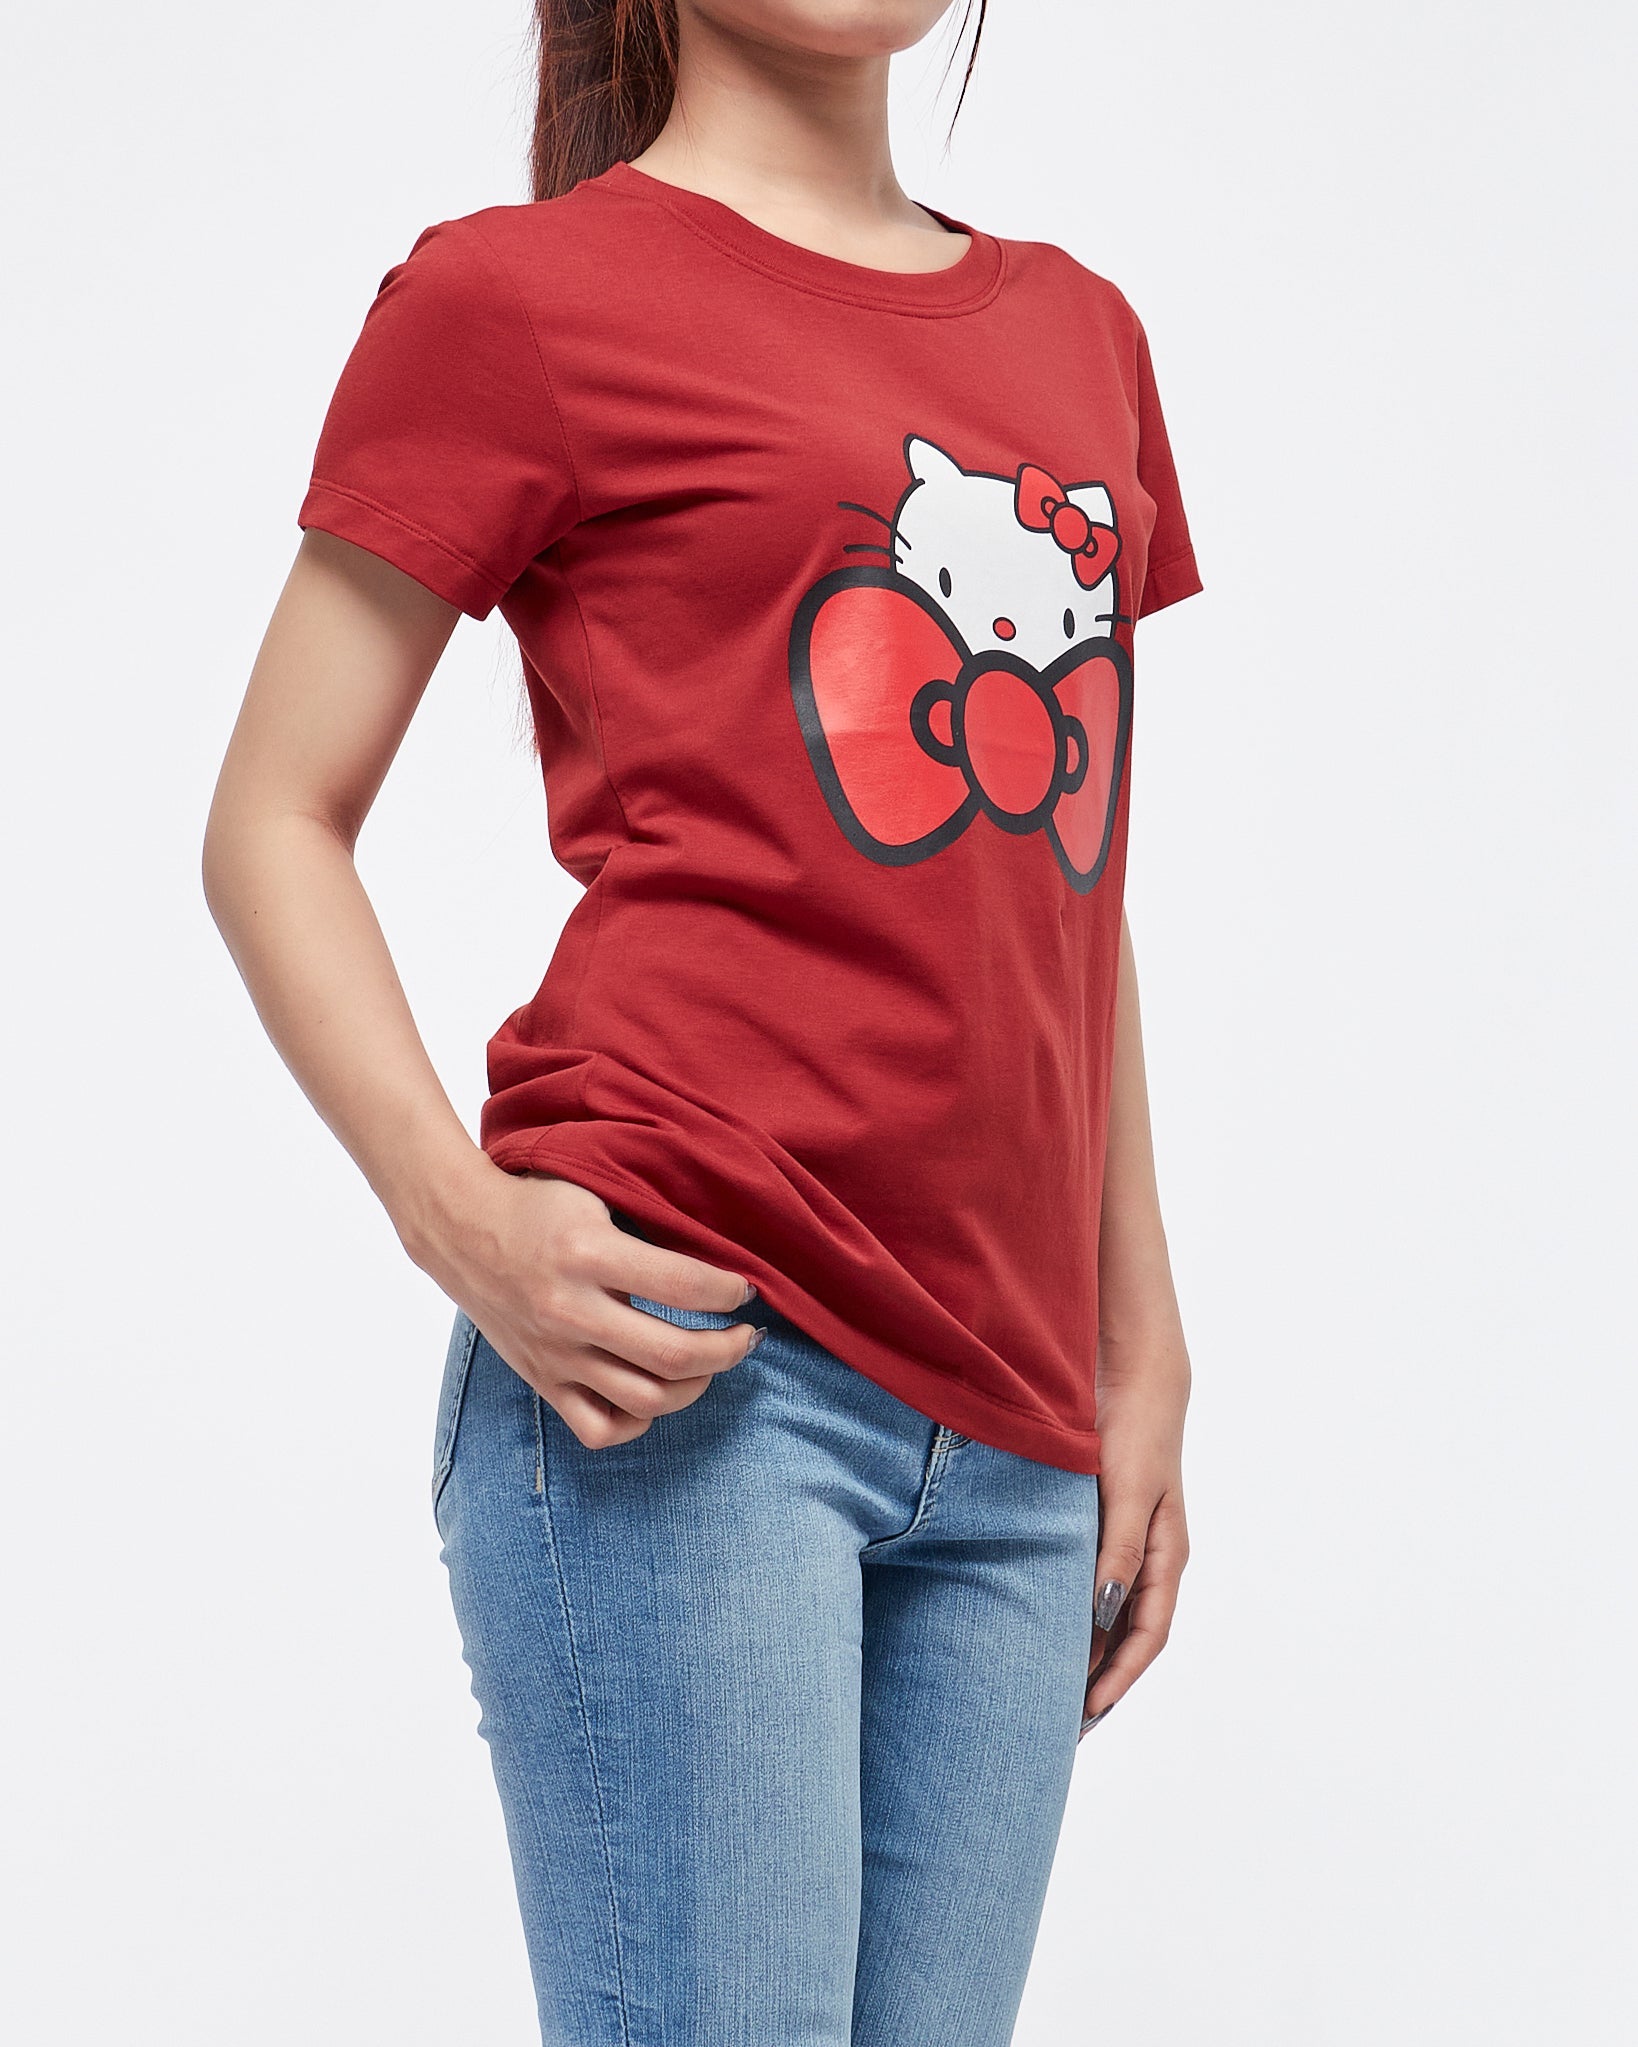 MOI OUTFIT-Hello Kitty Printed Lady T-Shirt 11.90